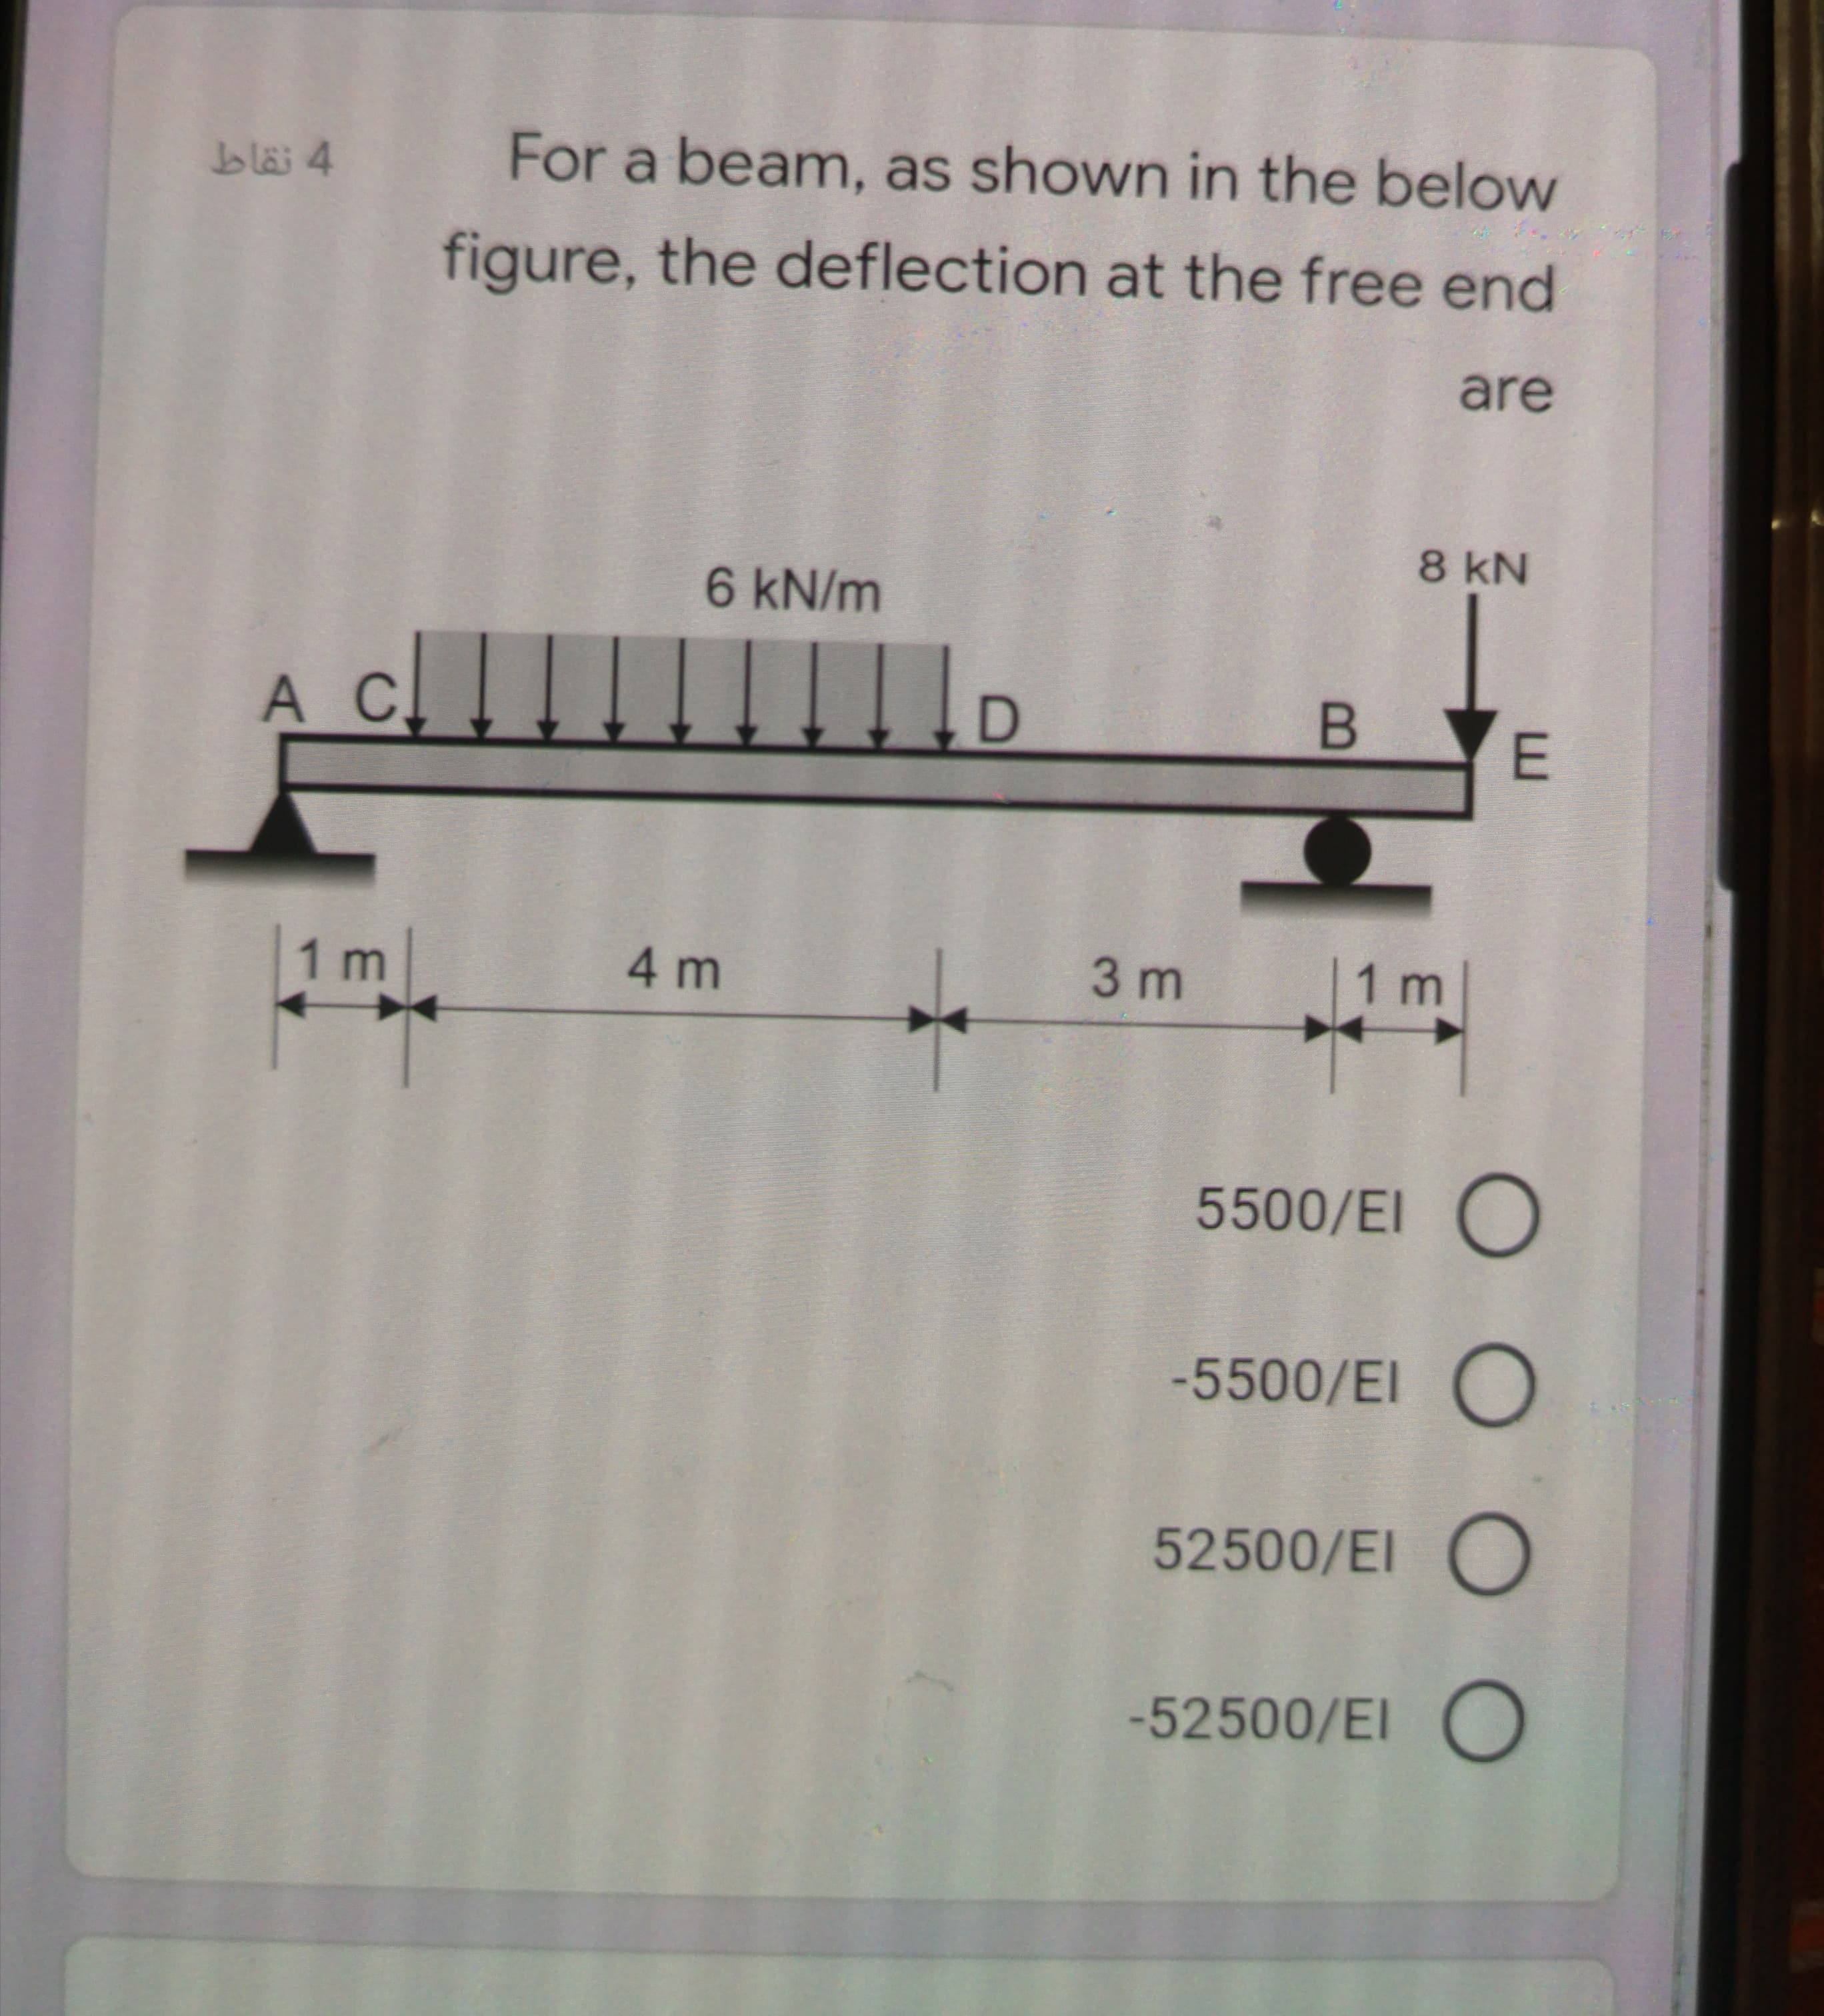 bläi 4
For a beam, as shown in the below
figure, the deflection at the free end
are
8 kN
6kN/m
A_c! !
D
B
E
1 m
4 m
3 m
|1m
